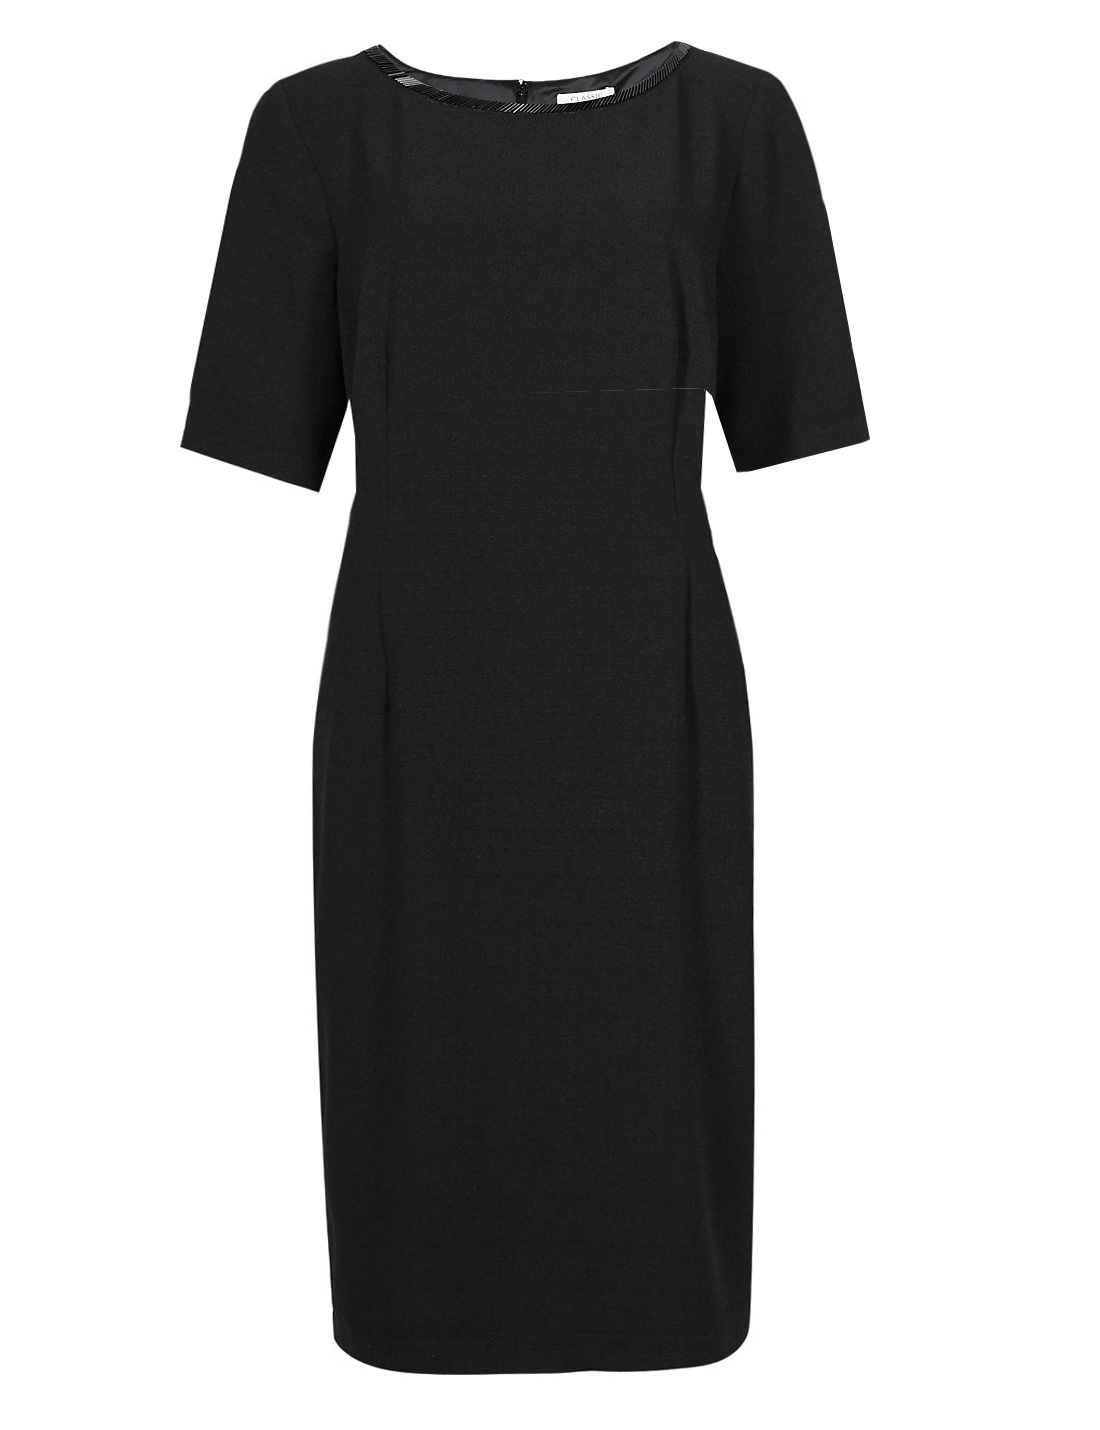 Marks and Spencer - - M&5 BLACK Beaded Scoop Neck Textured Shift Dress ...